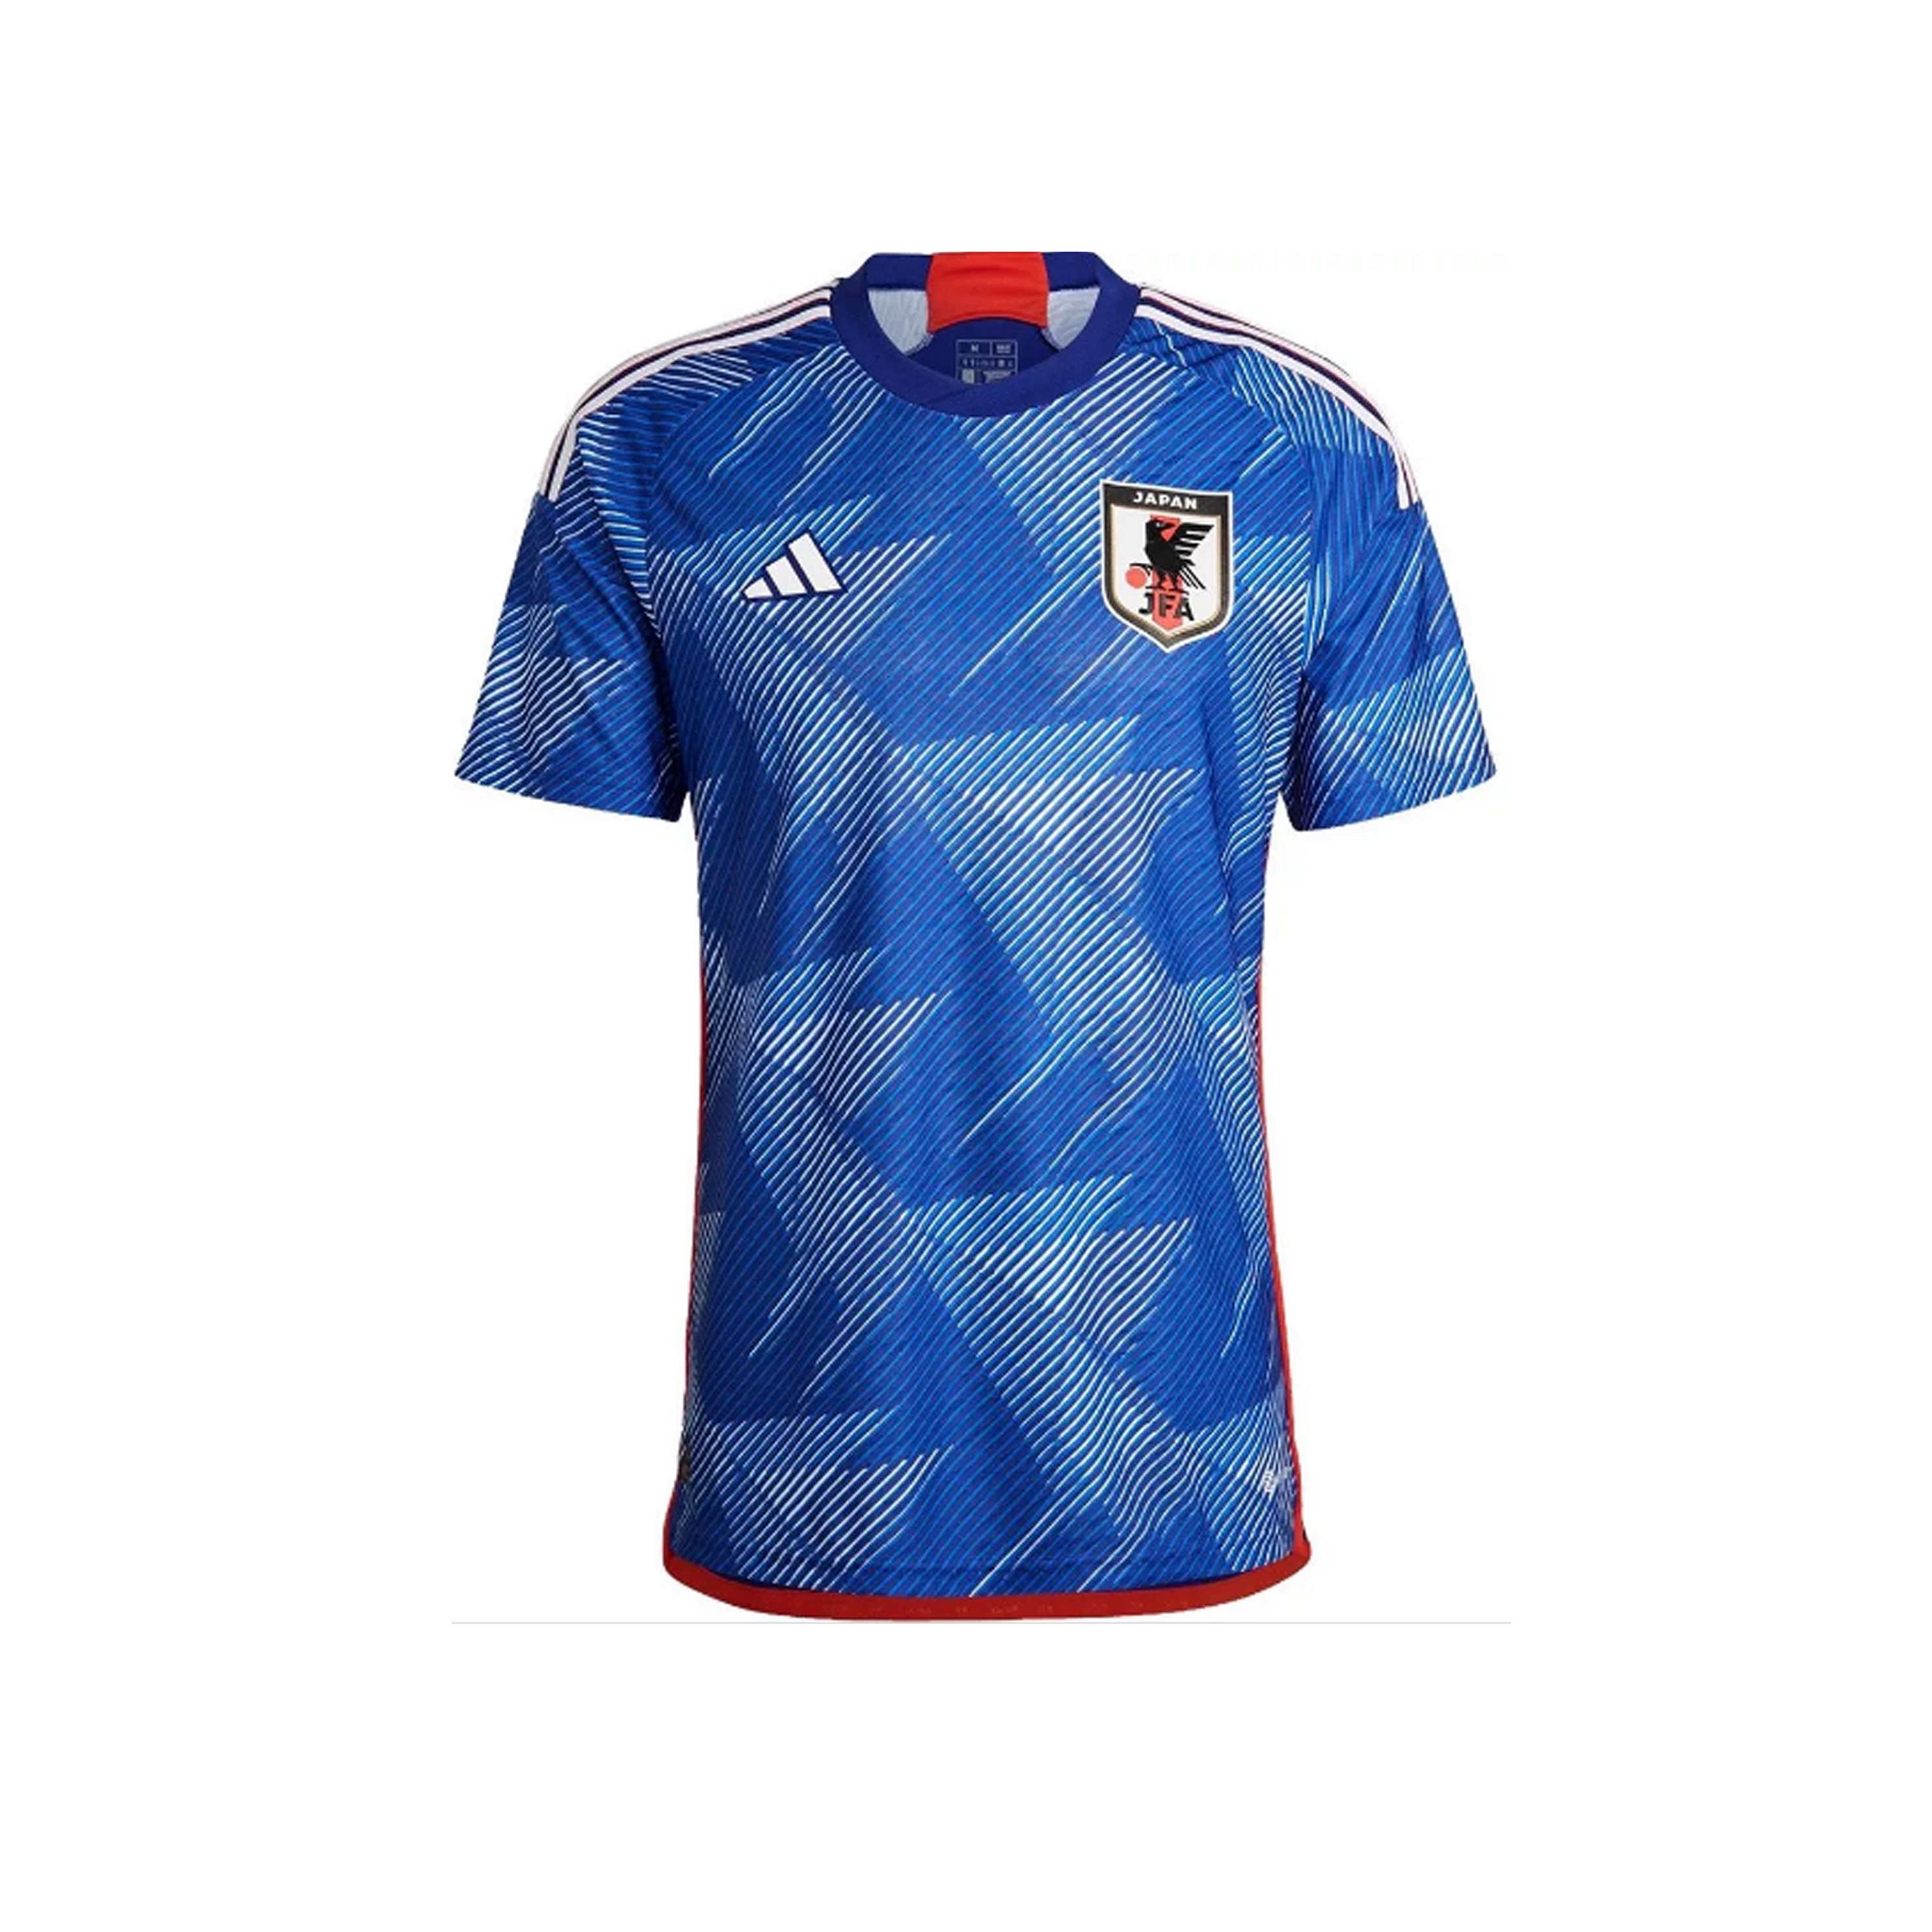 World Cup Jersey - Japan Home Jersey